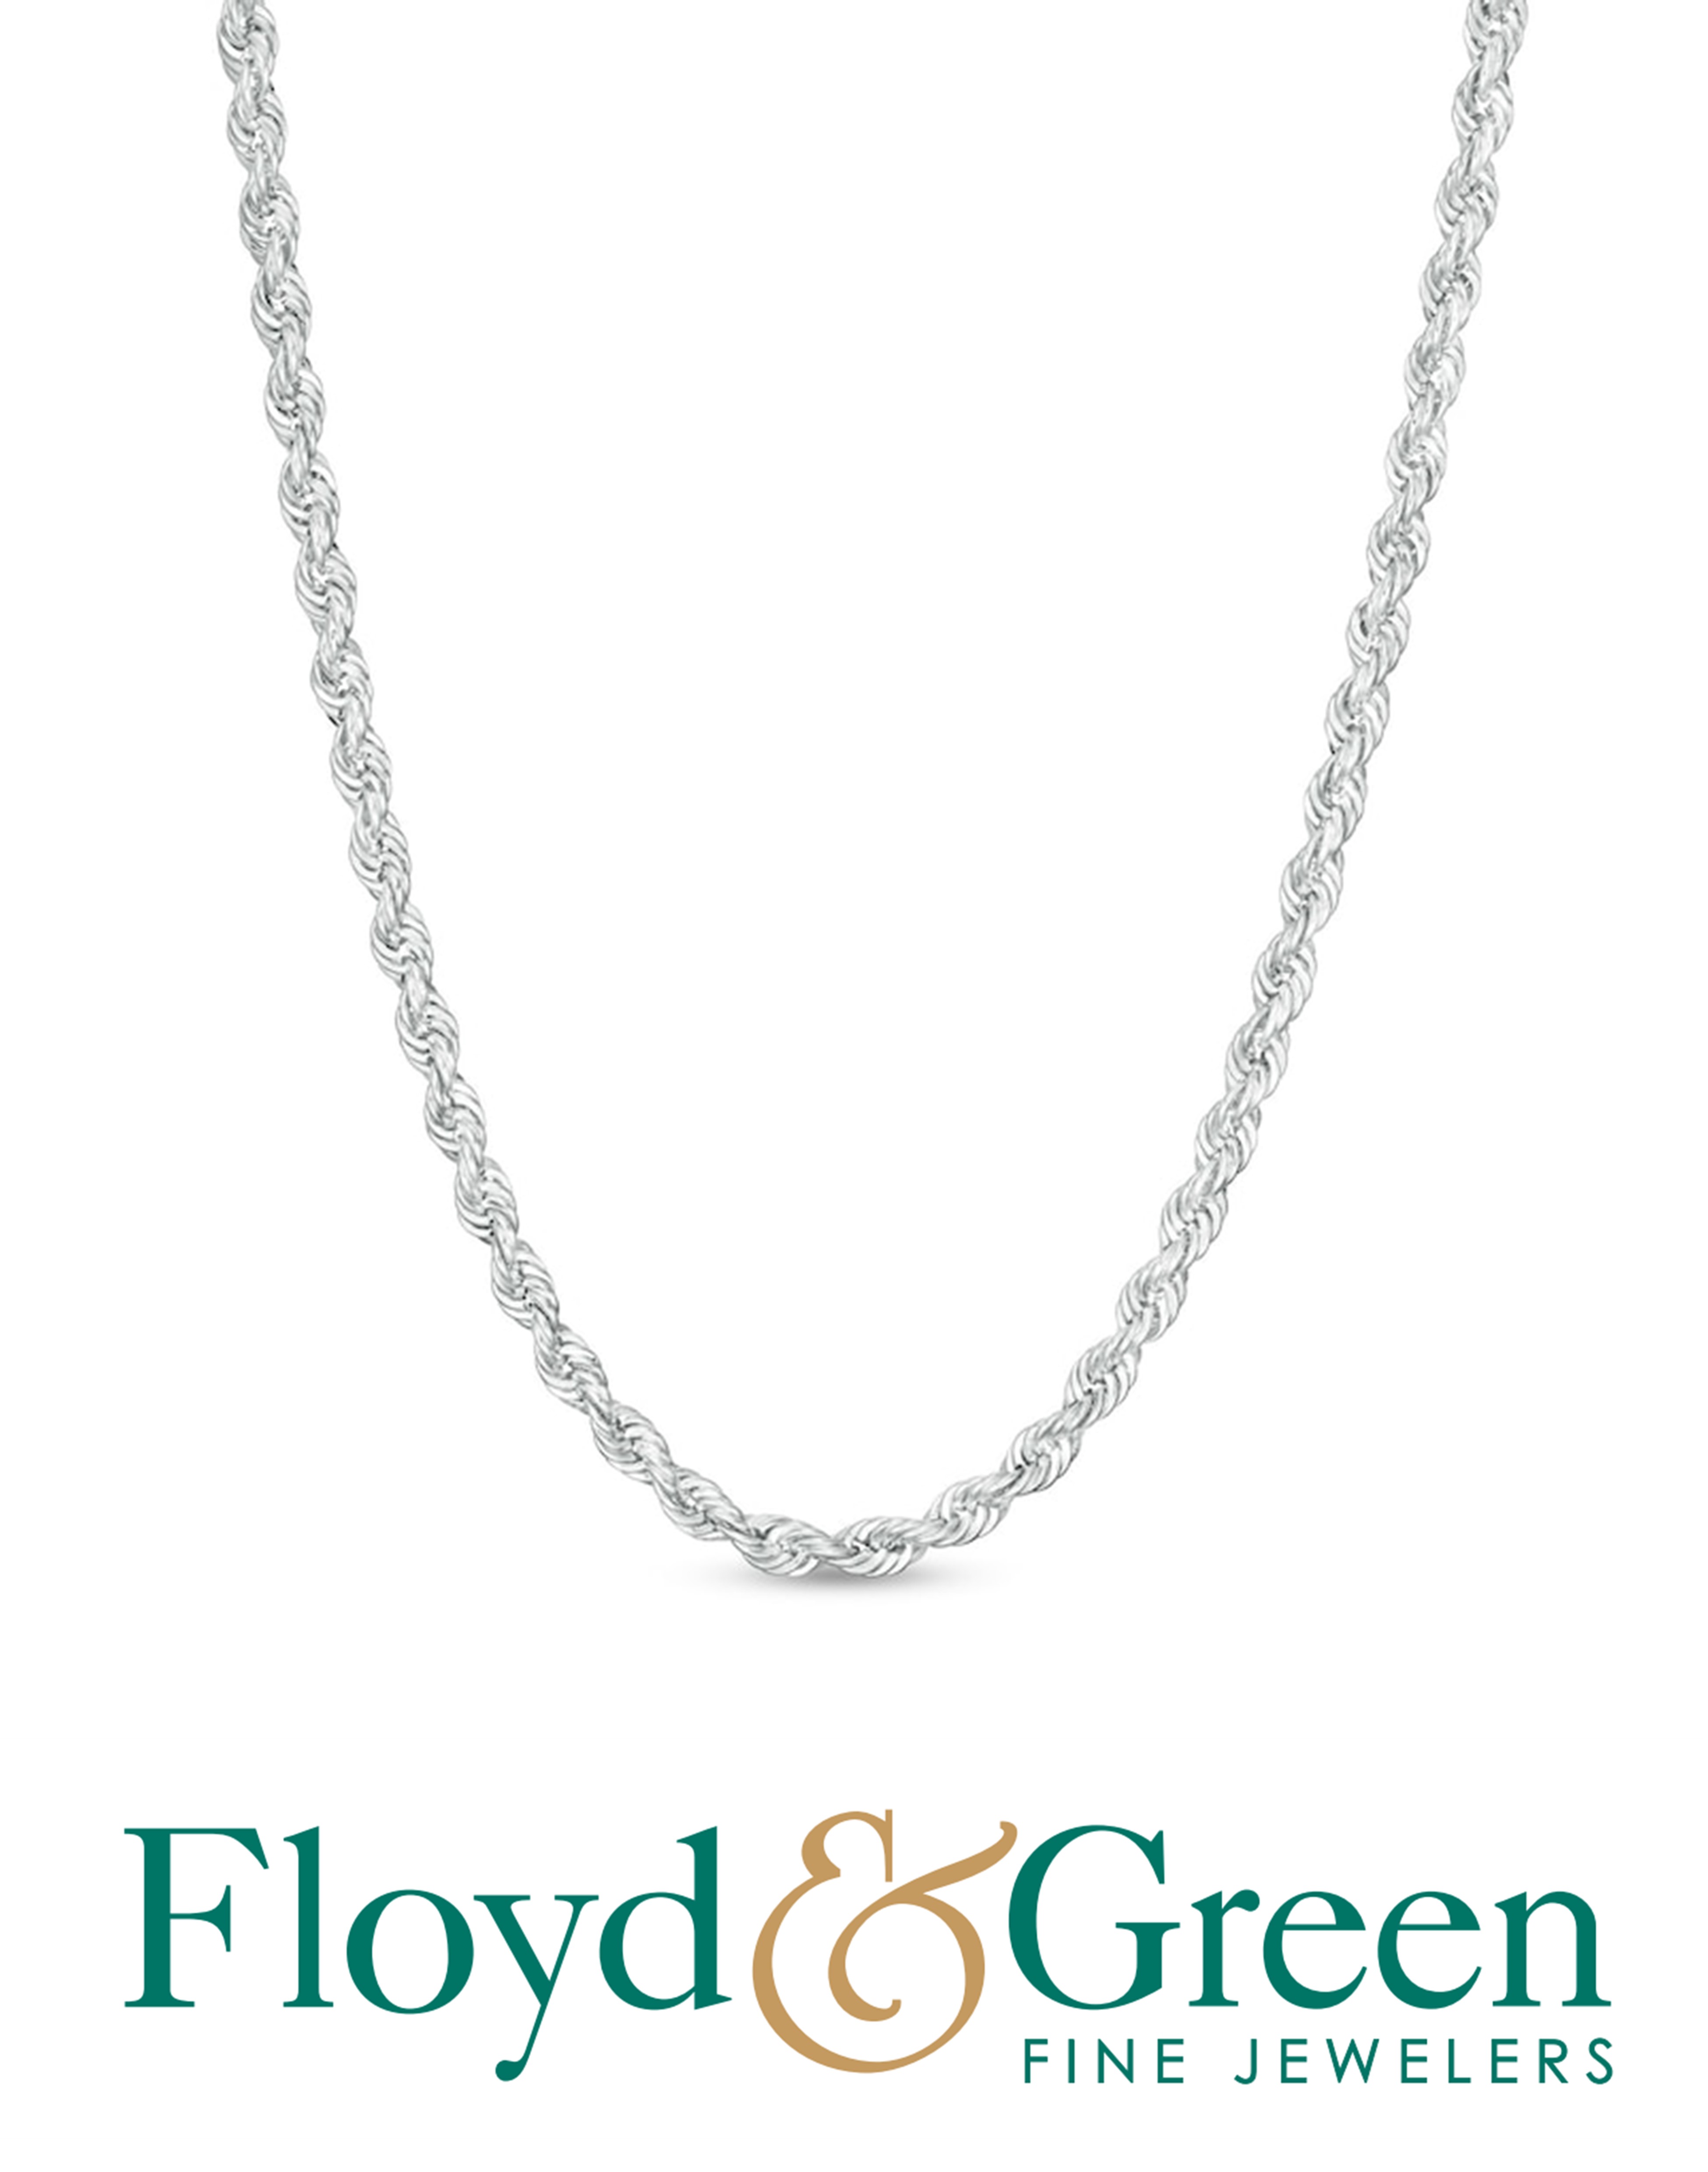 White Gold Rope Chain